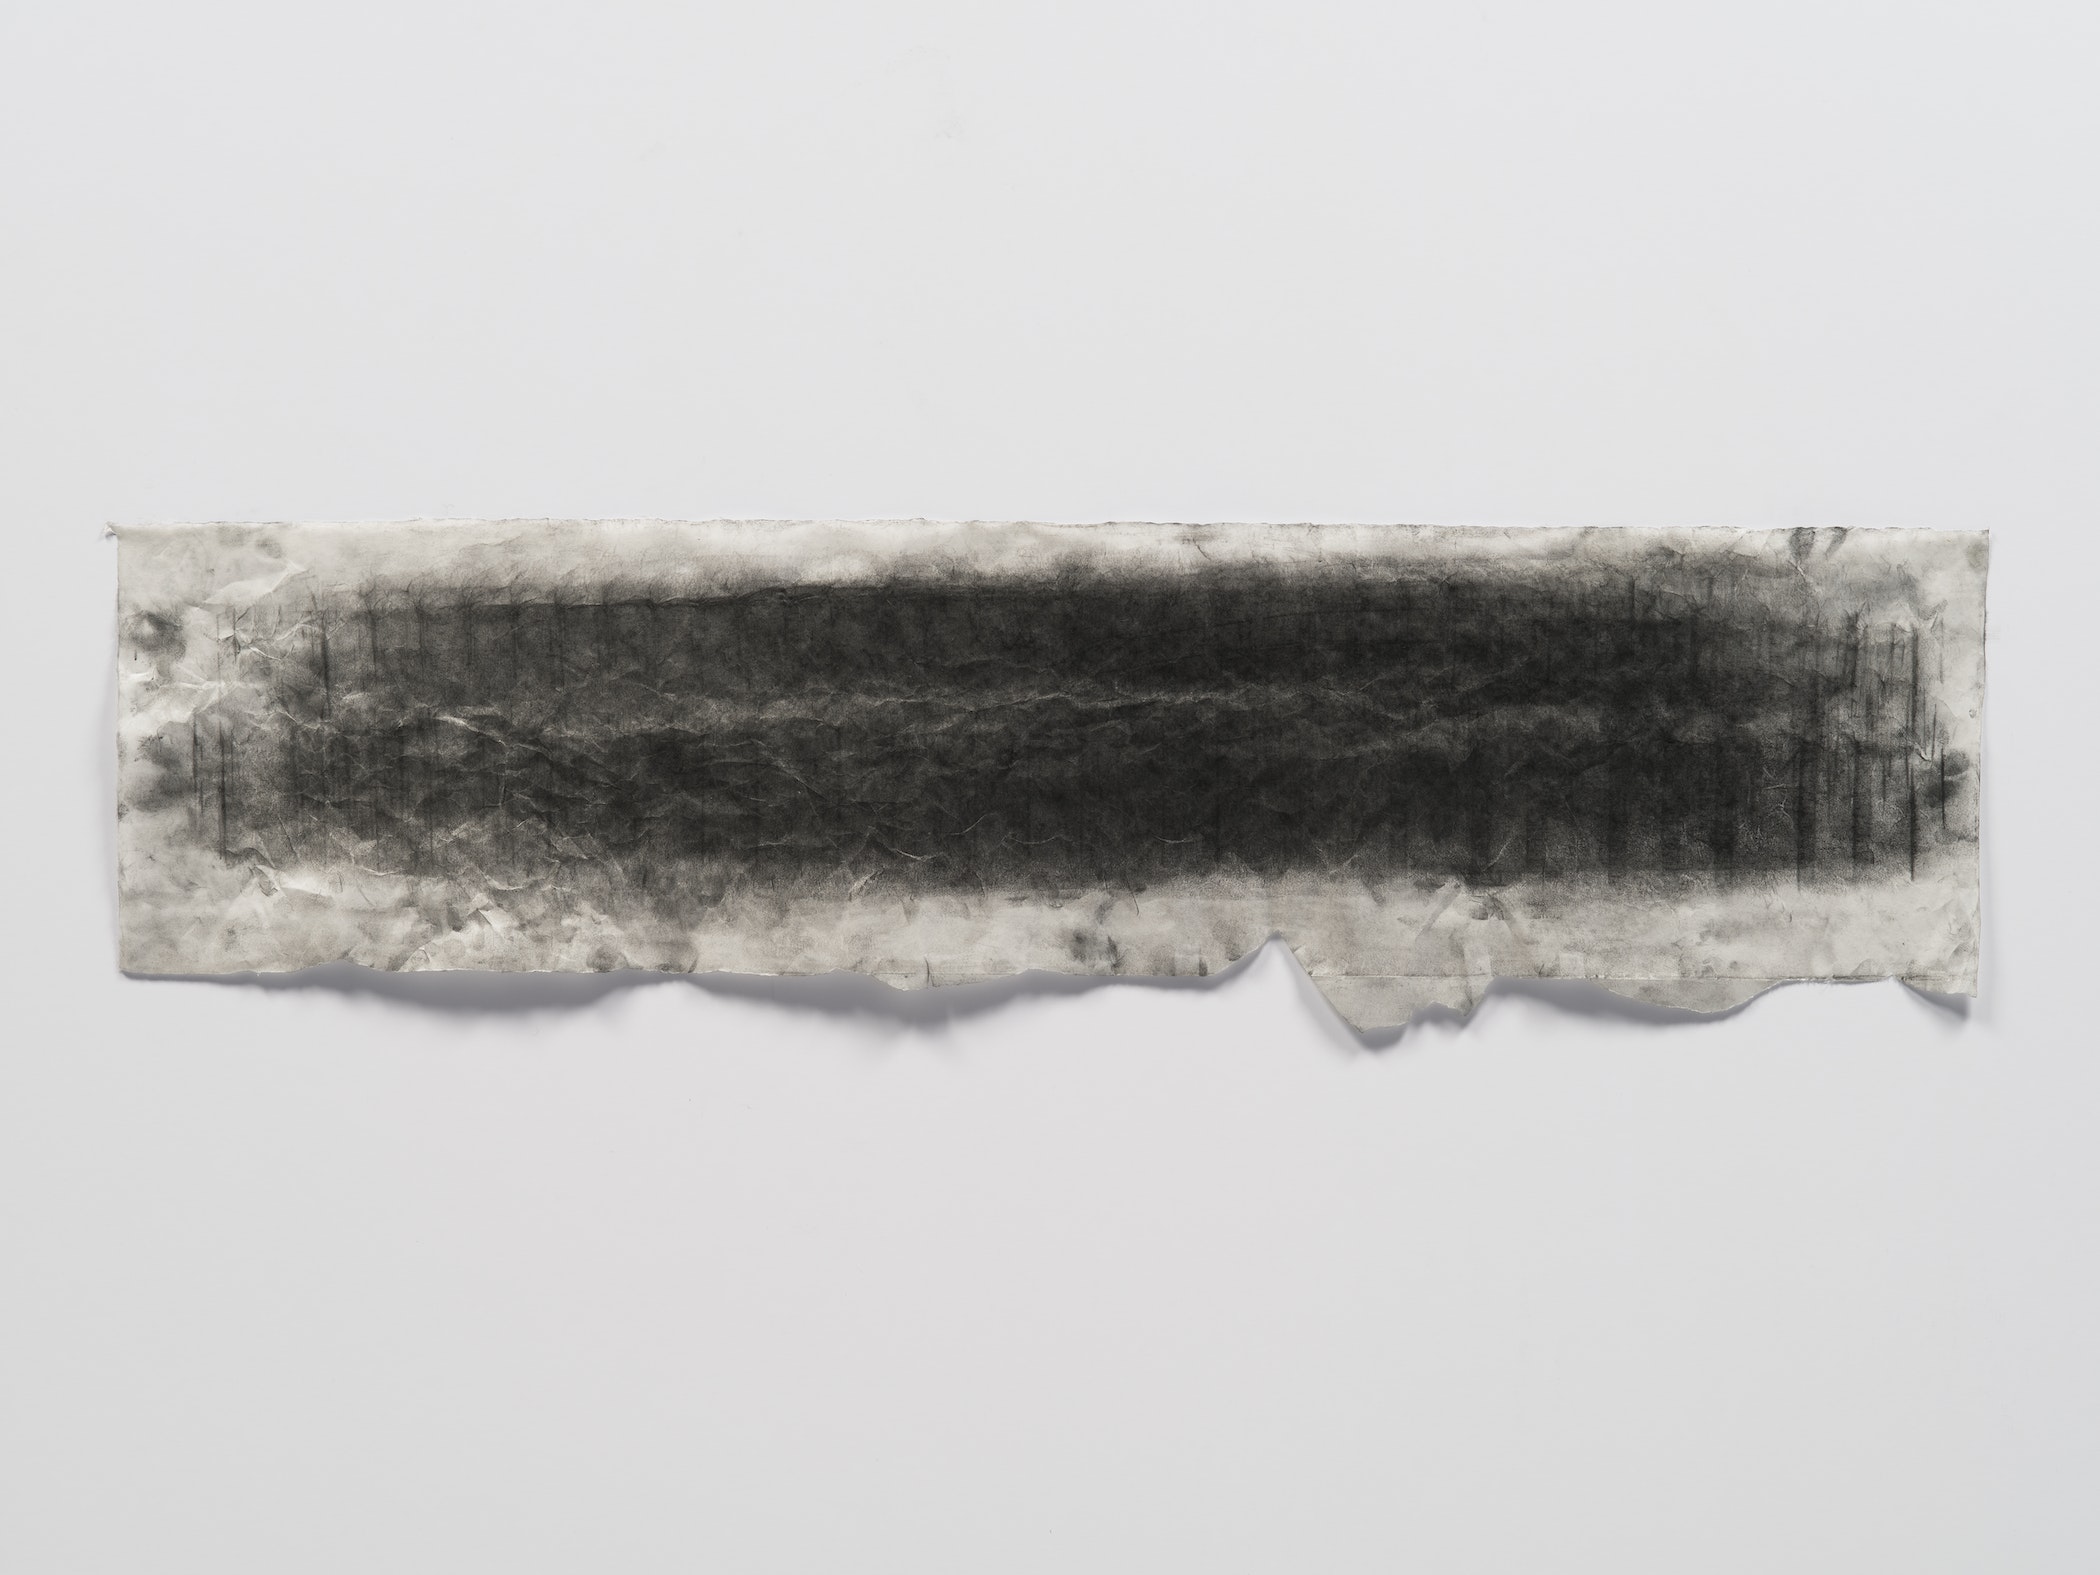 Long, rough paper with solid dark markings hung horizontally on white wall.